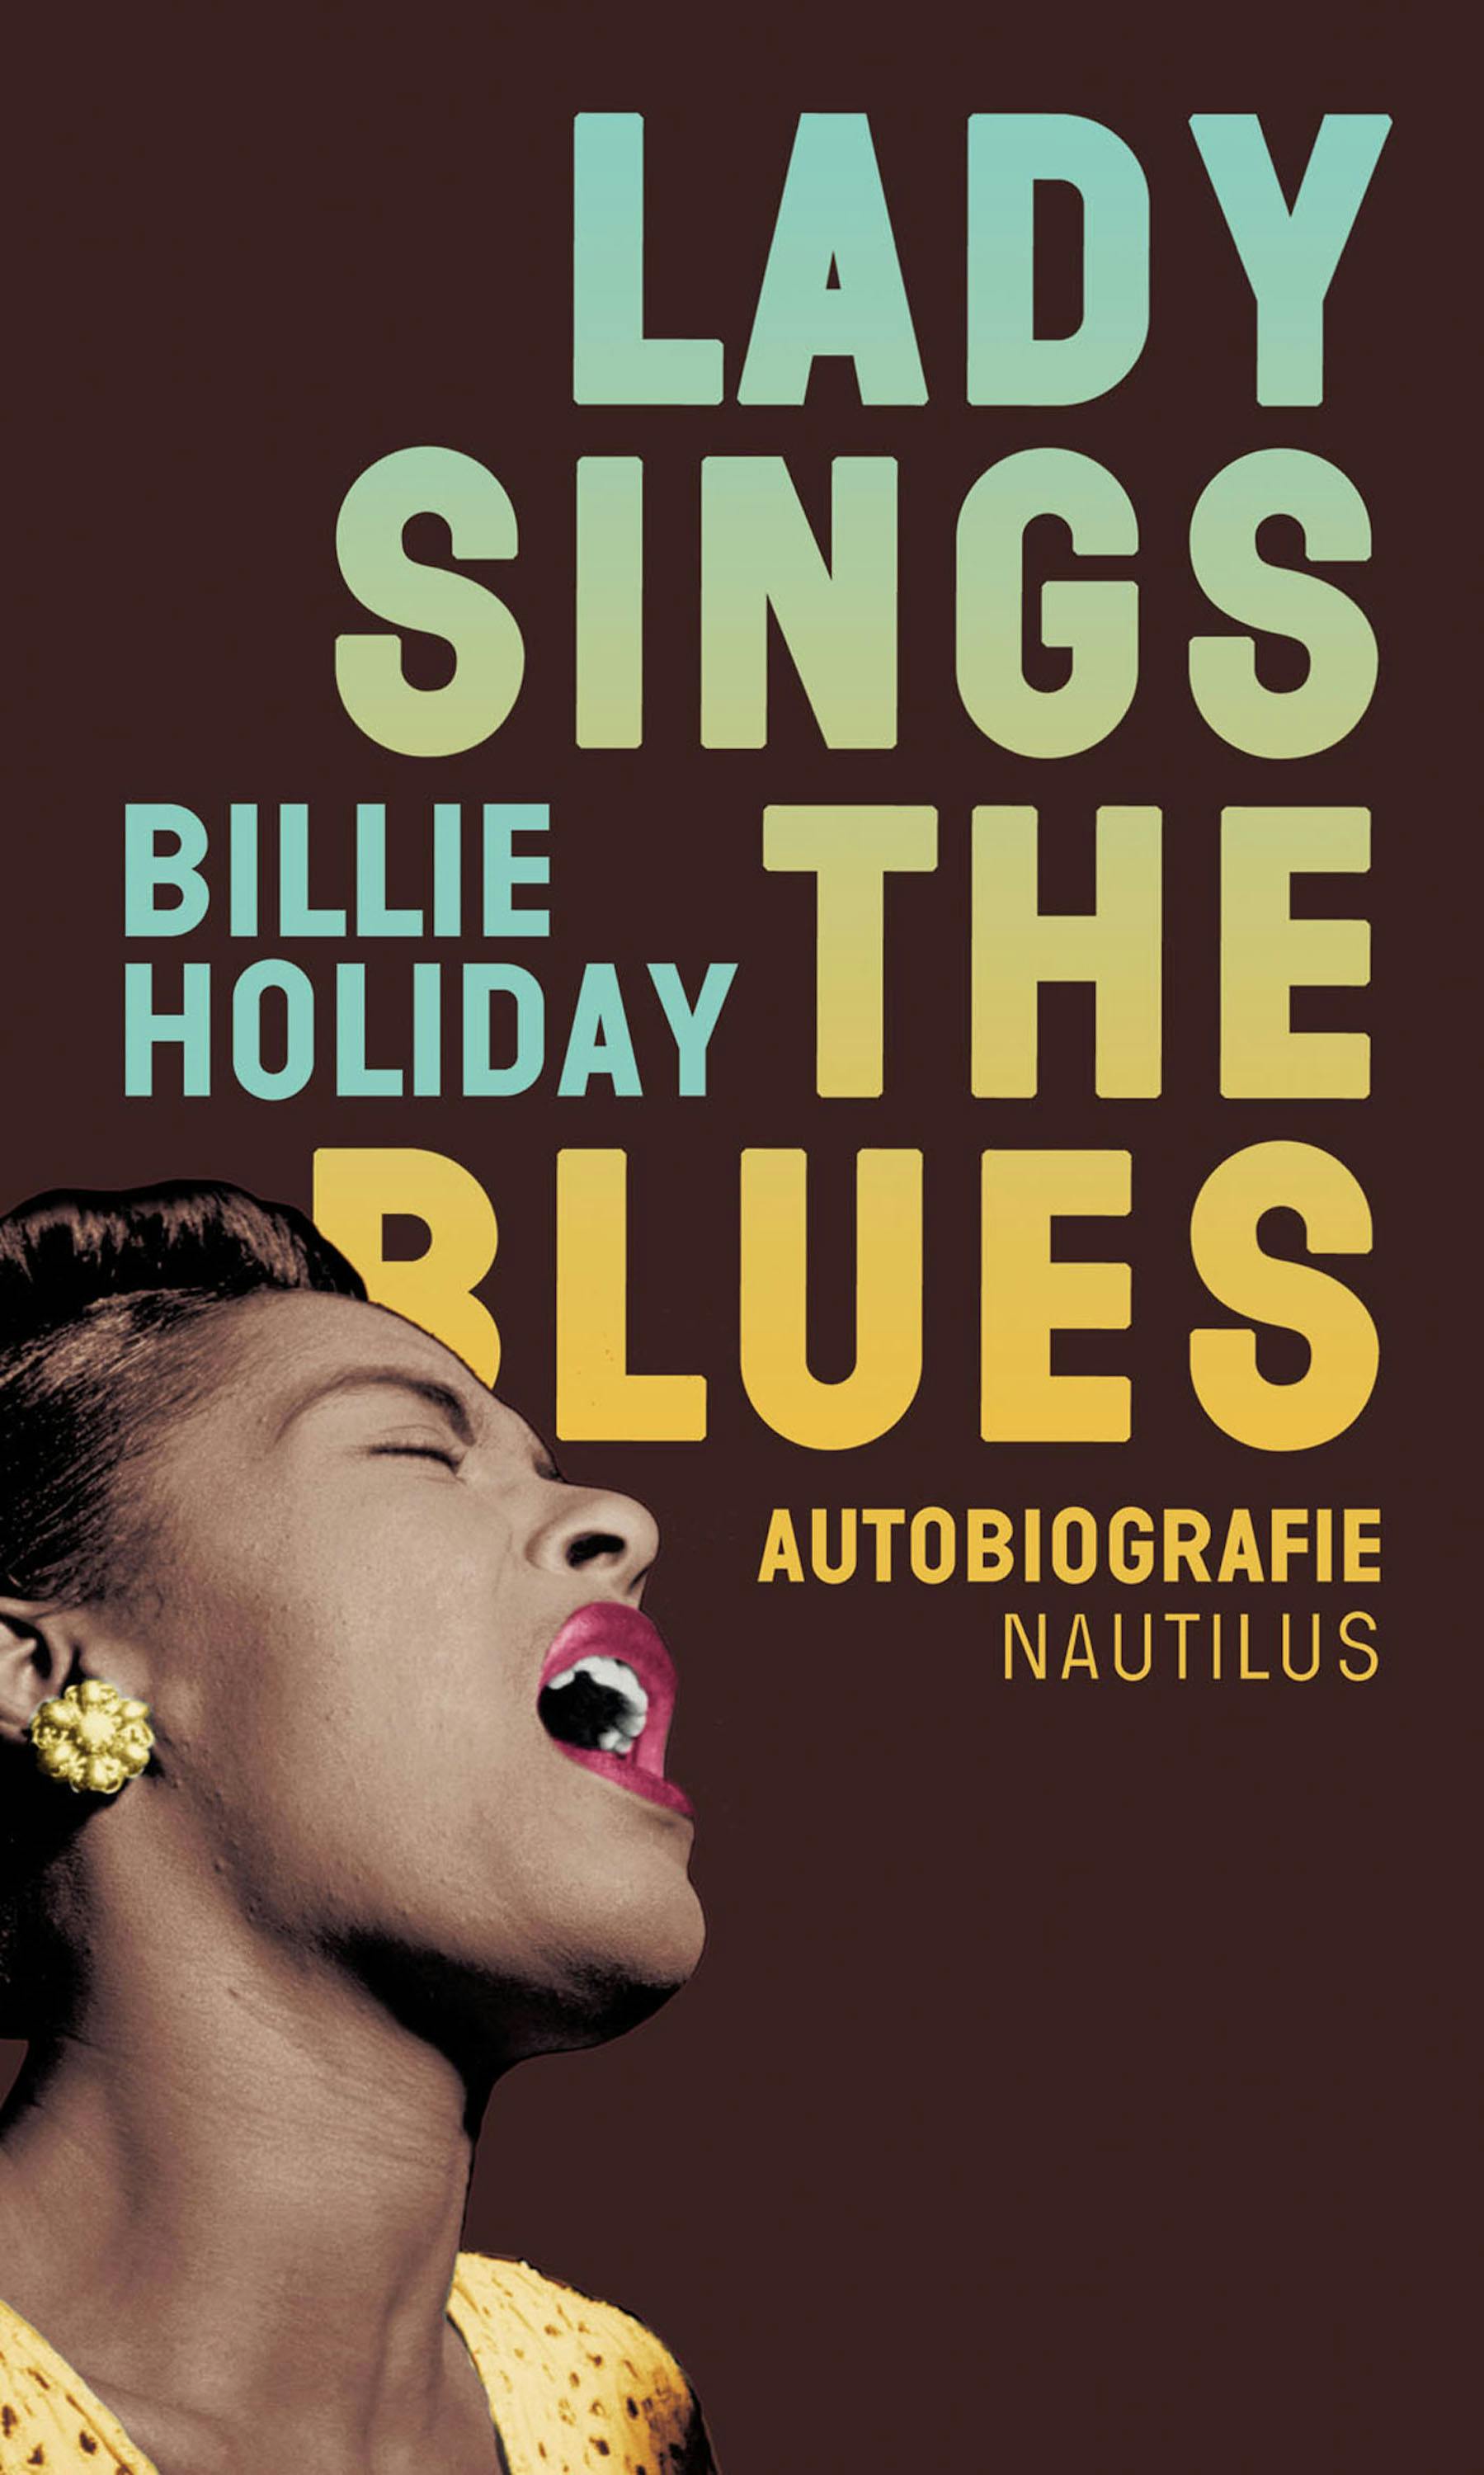 Lady sings the Blues - Billie Holiday